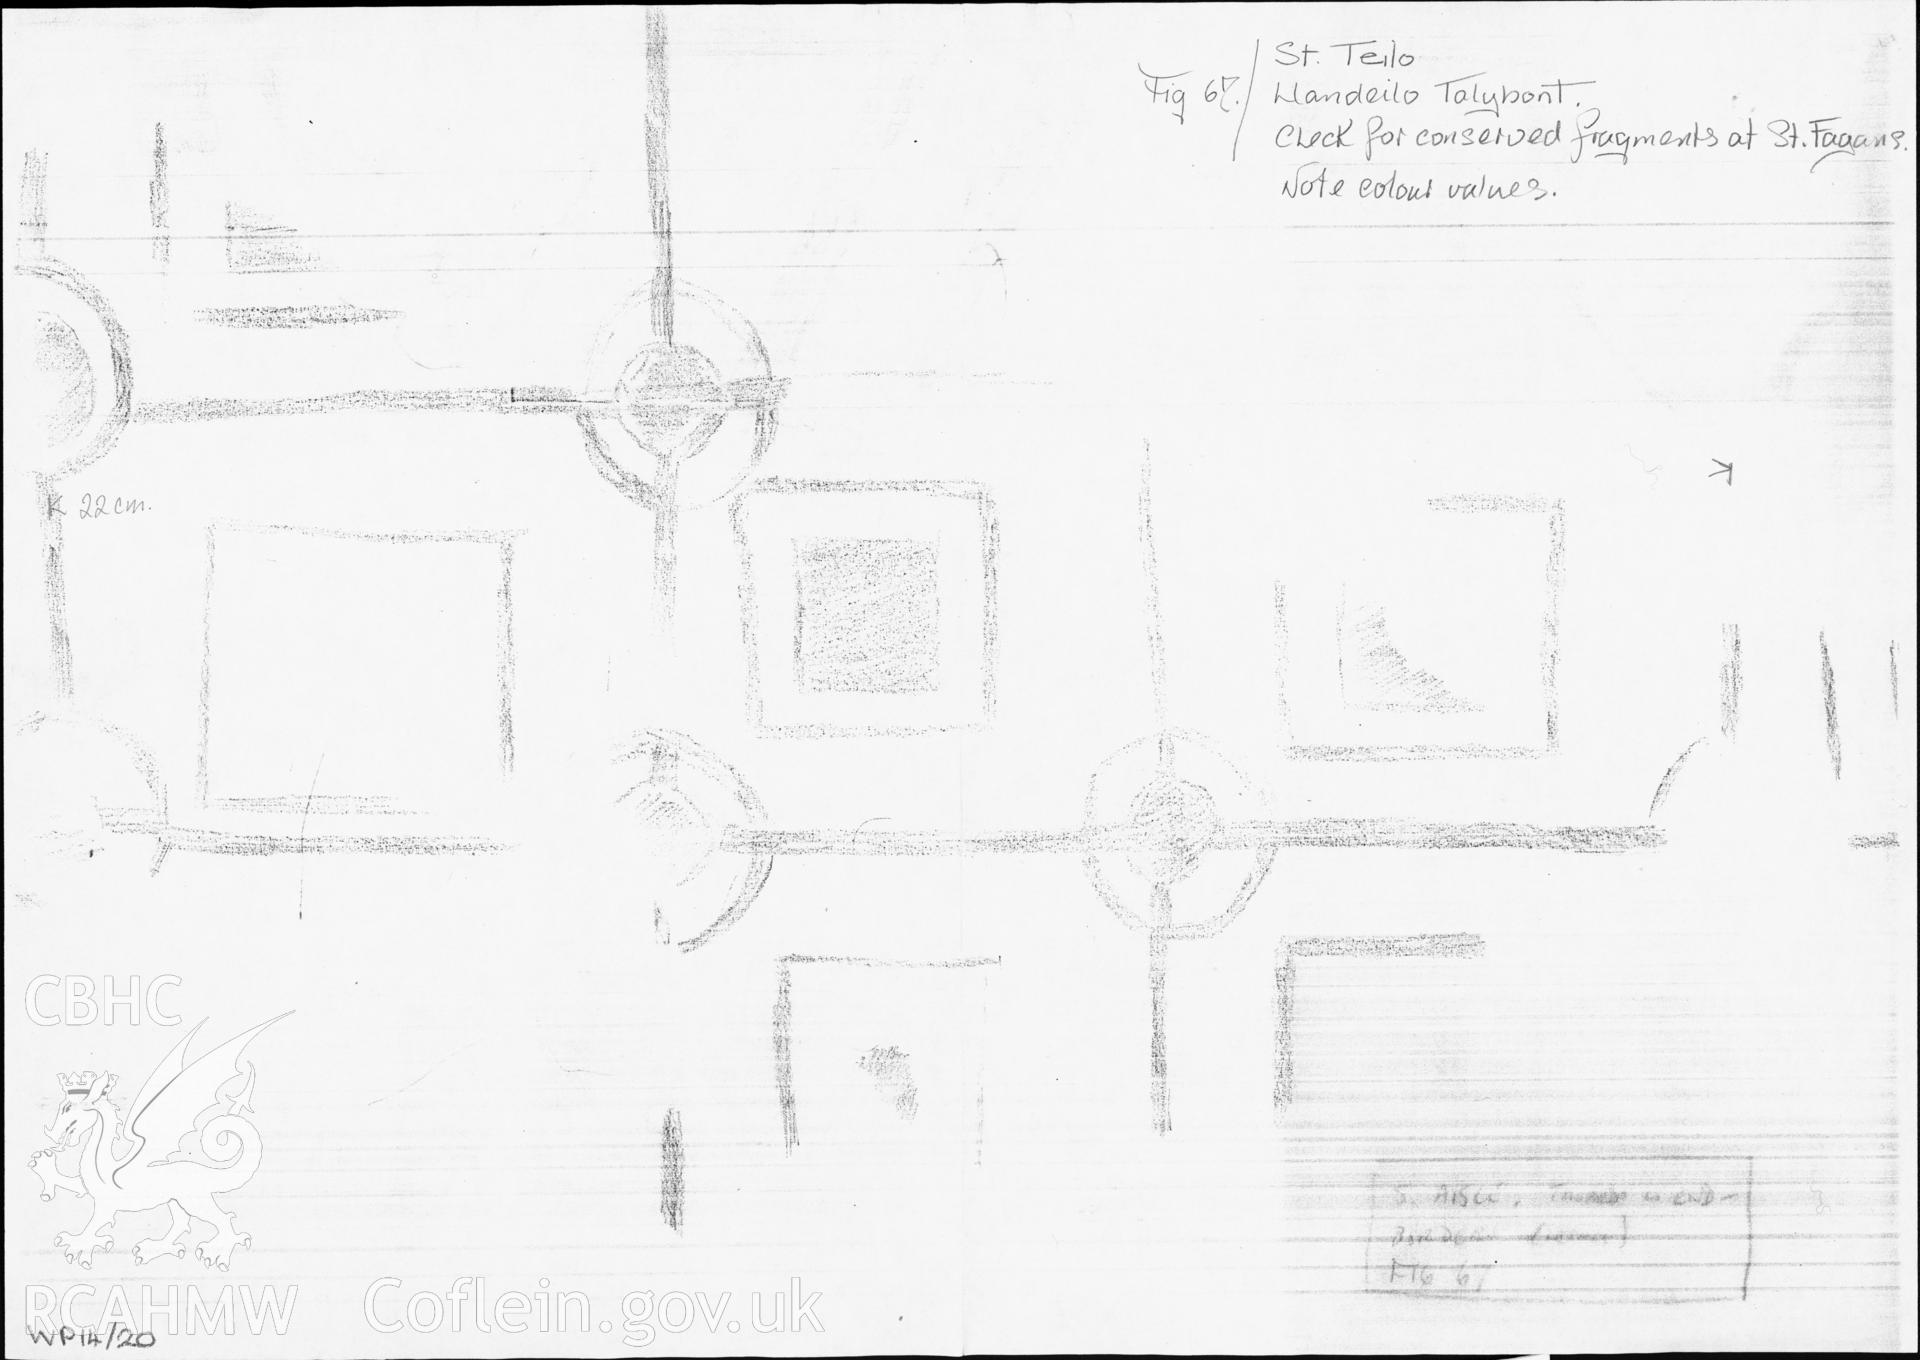 Annotated photocopy of part of a reconstruction painting  on tracing paper showing the wall painting of "border 2" in the south aisle in St Teilo's Church, Llandeilo Talybont, produced by D.J. Roberts and A.J. Parkinson, undated.